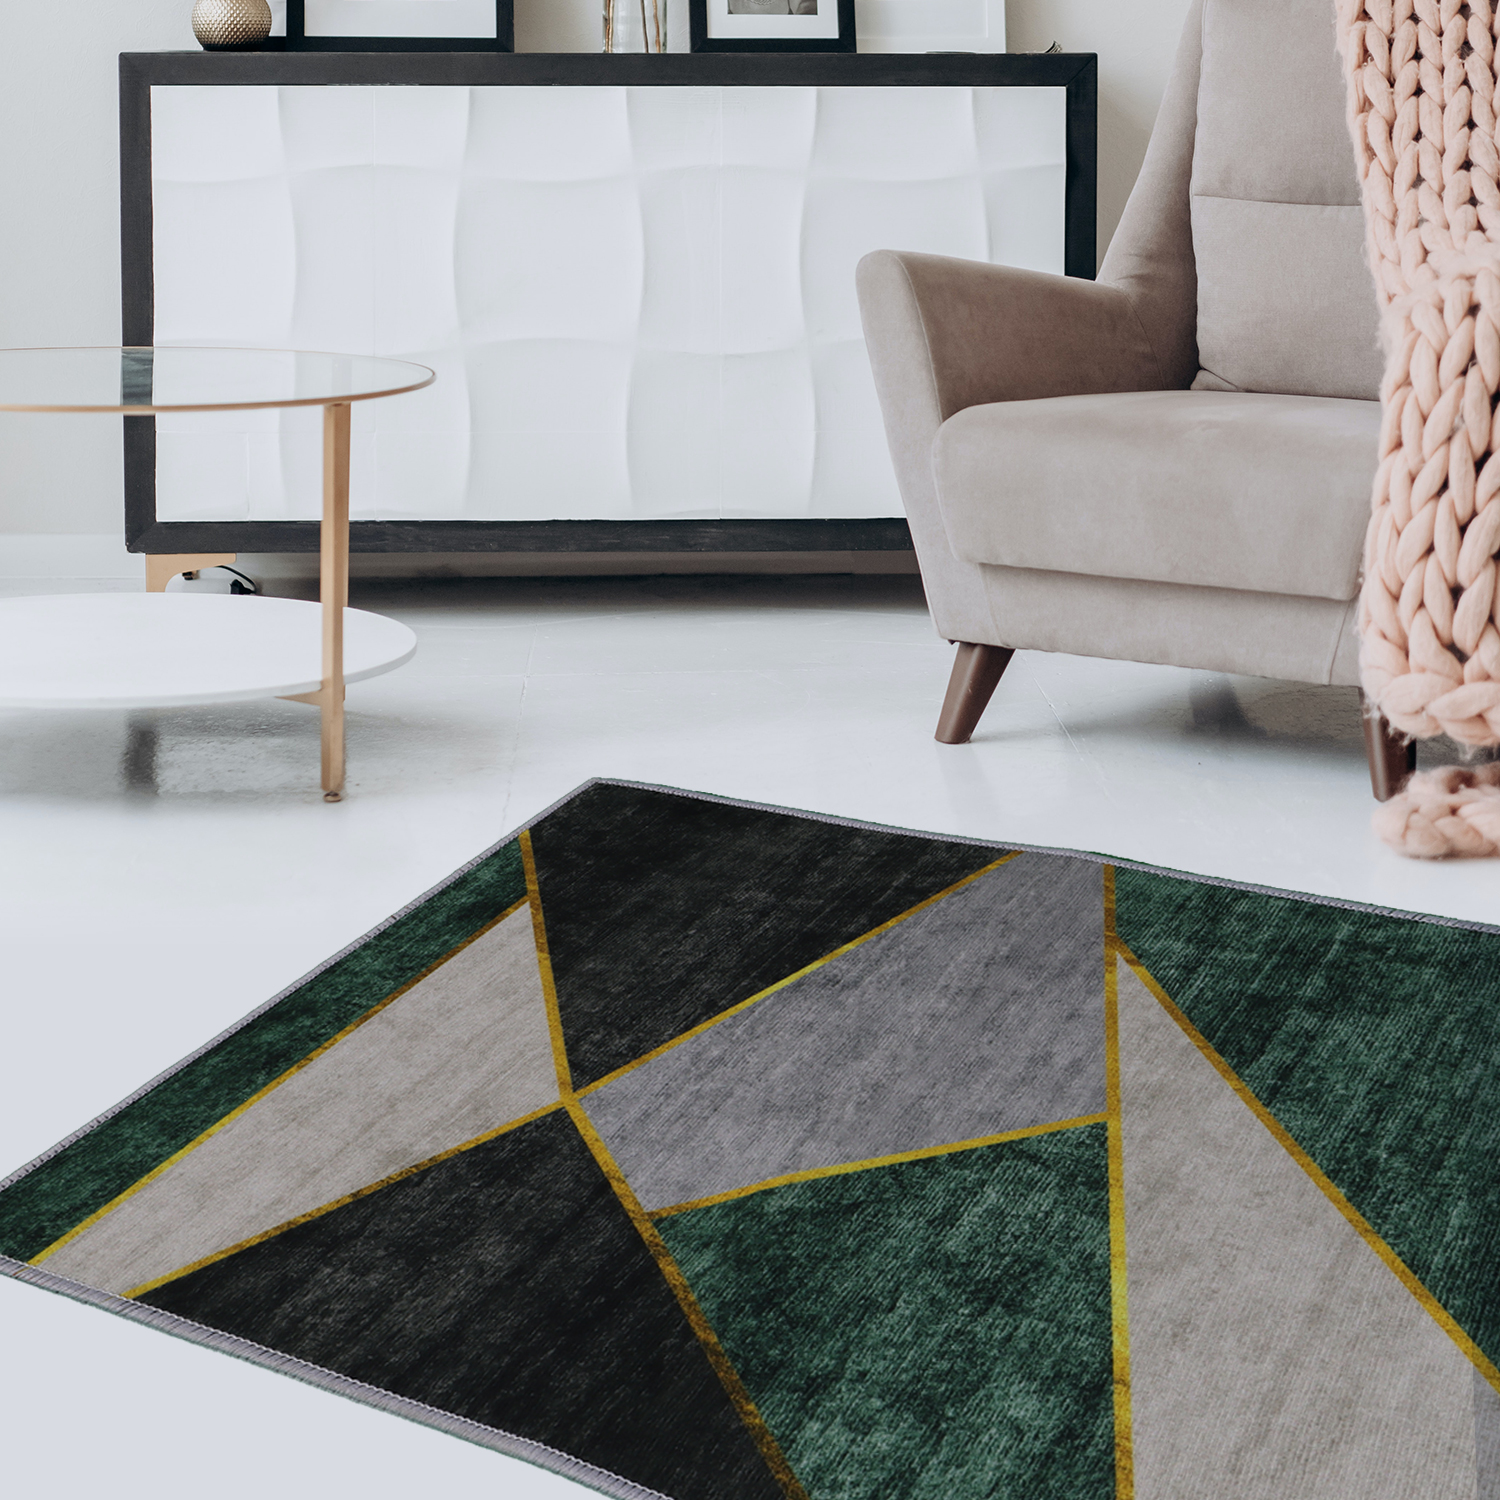 Casual Geometric Cotton Area Rug，Modern Abstract Geometric Shapes Accent Outdoor Rug 5ft x 7.5ft for Patio Bedrooms, Dining Rooms, Living Rooms Light Grey /Green-CASAINC